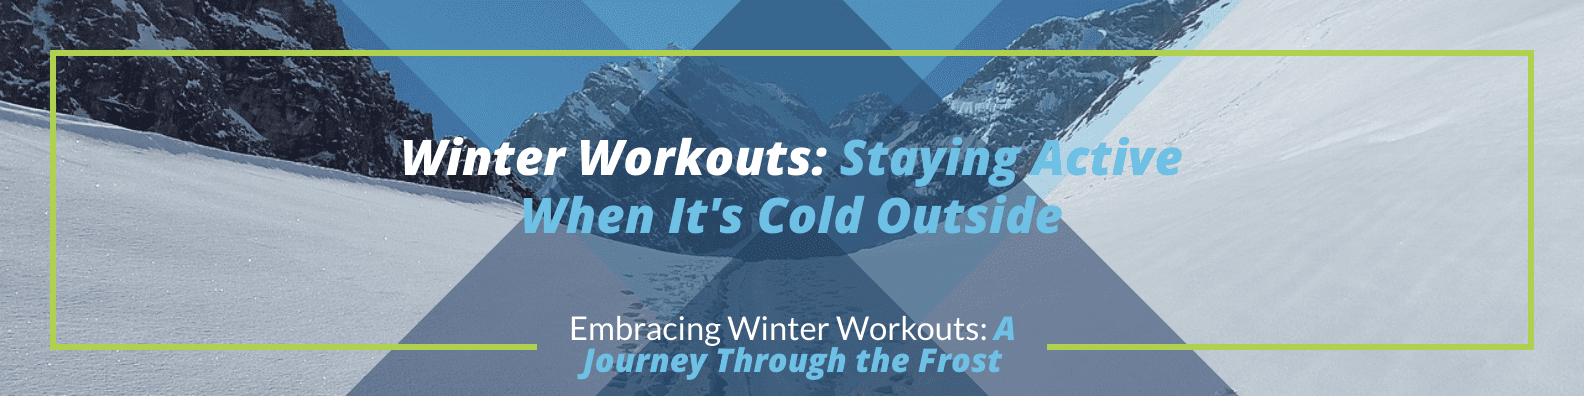 Embracing Winter Workouts: A Journey Through the Frost